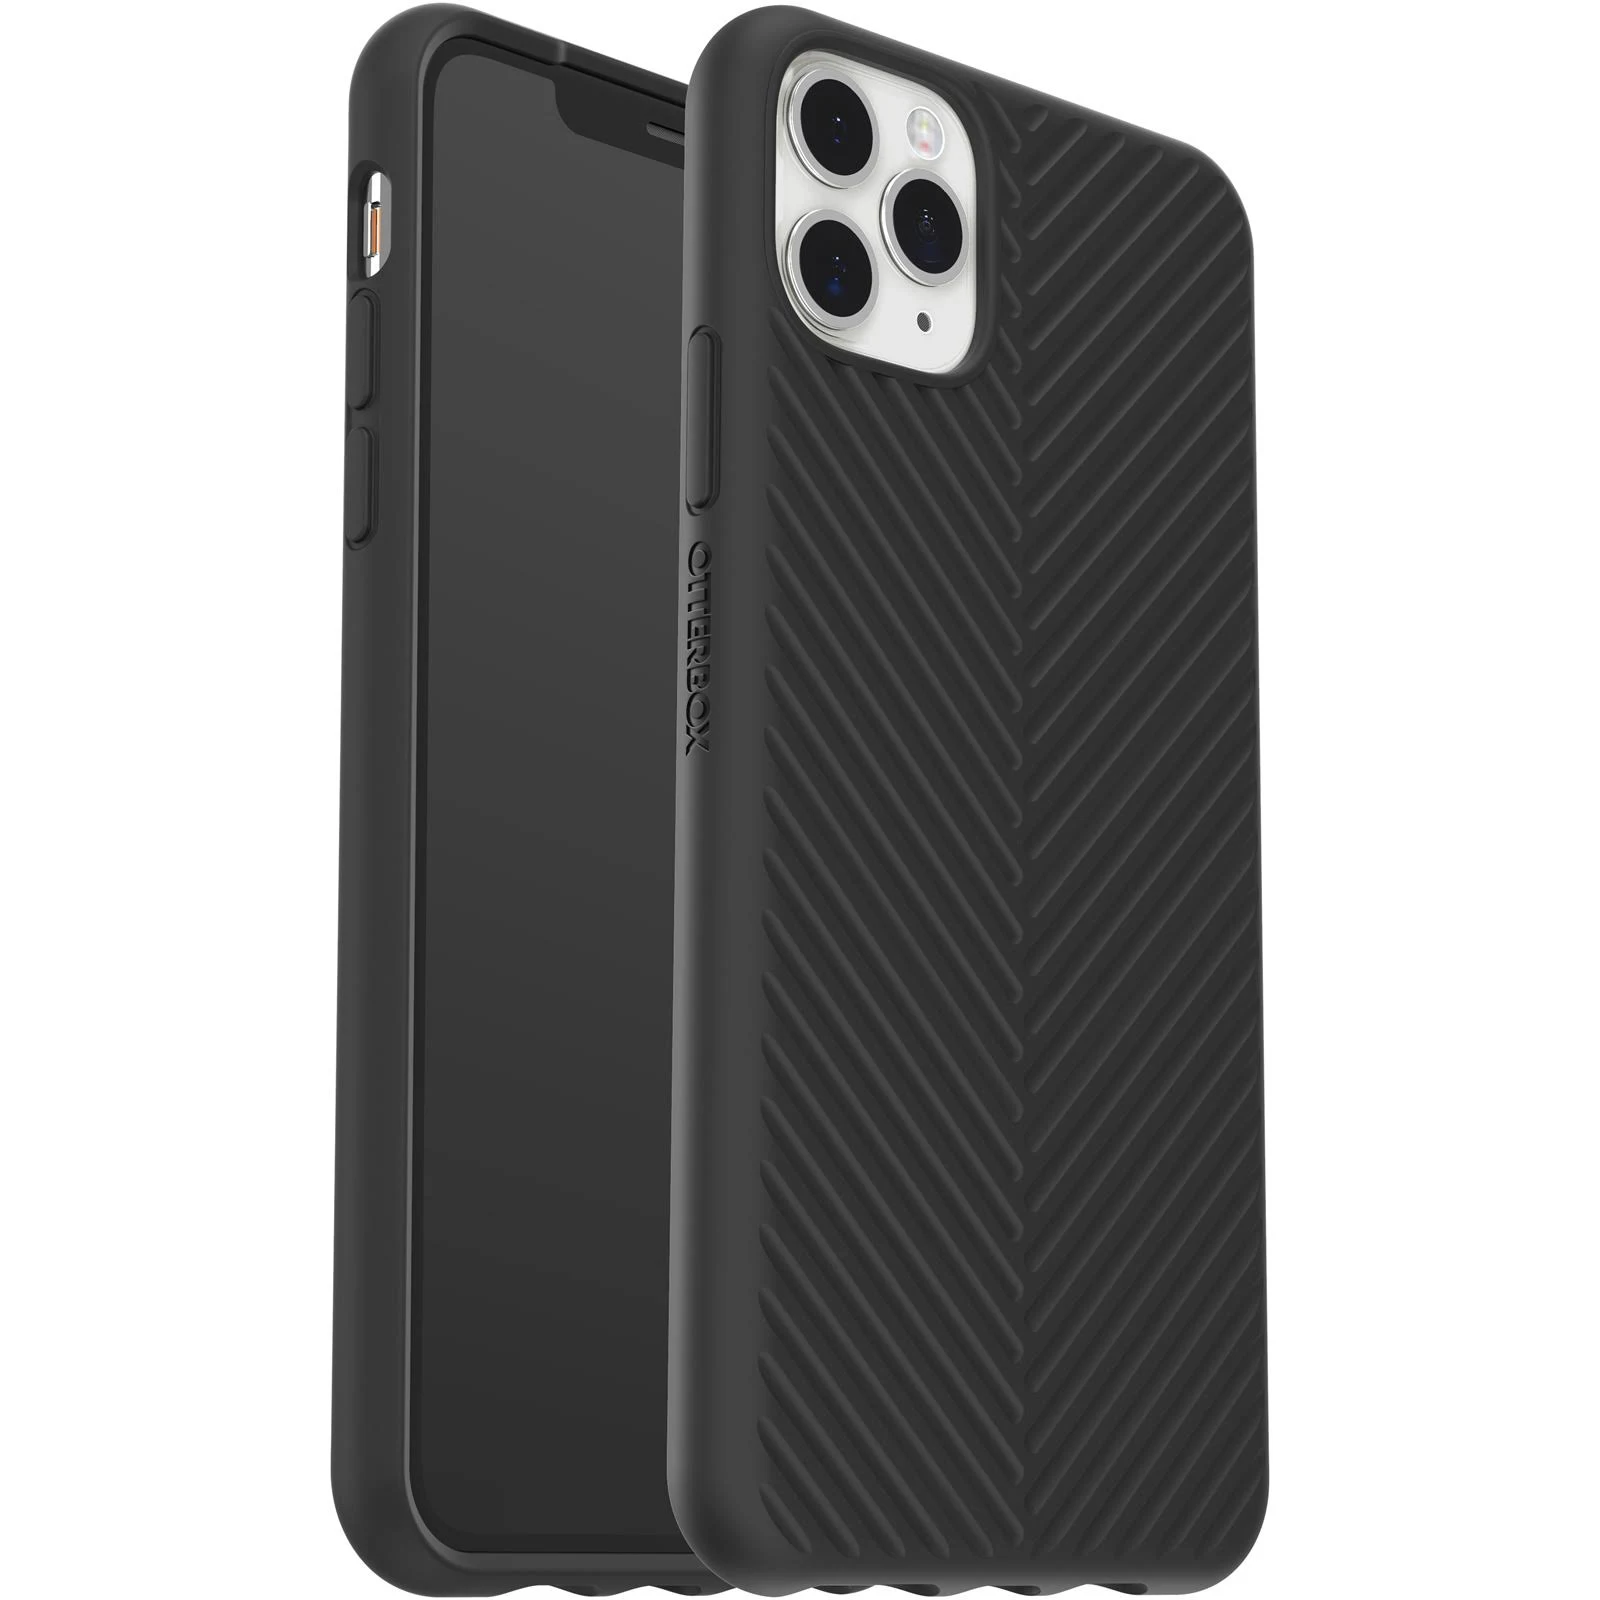 OtterBox FIGURA SERIES Case for Apple iPhone 11 Pro - Black (Certified Refurbished)